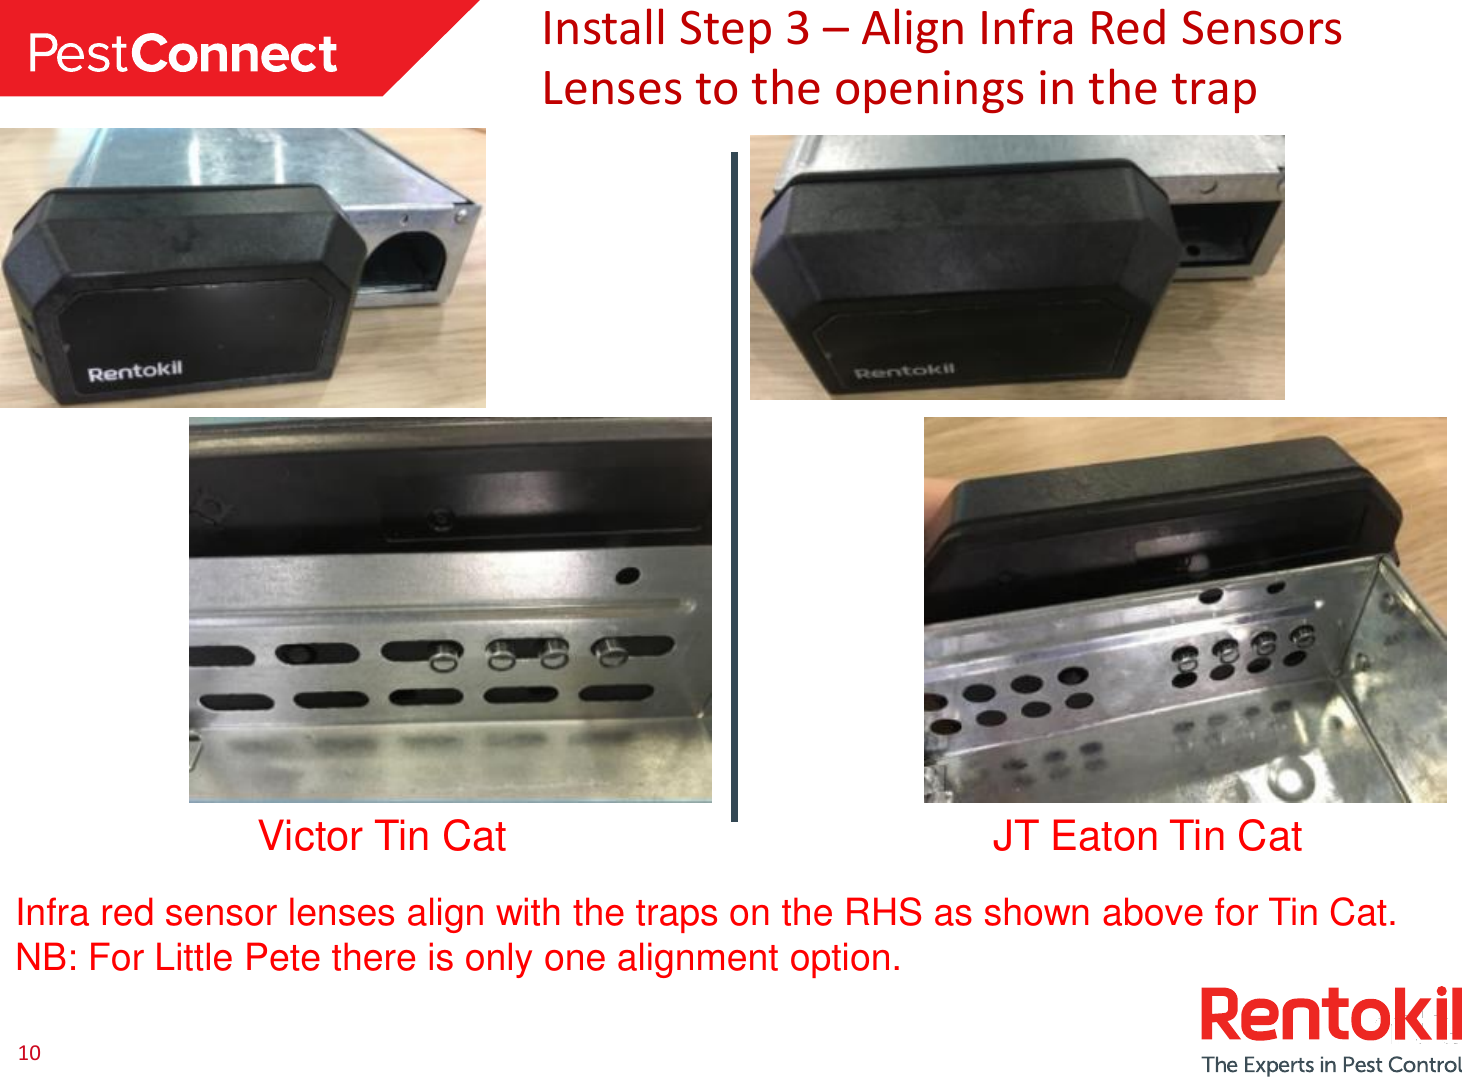 10 Install Step 3 – Align Infra Red Sensors Lenses to the openings in the trap Infra red sensor lenses align with the traps on the RHS as shown above for Tin Cat. NB: For Little Pete there is only one alignment option. Victor Tin Cat  JT Eaton Tin Cat 